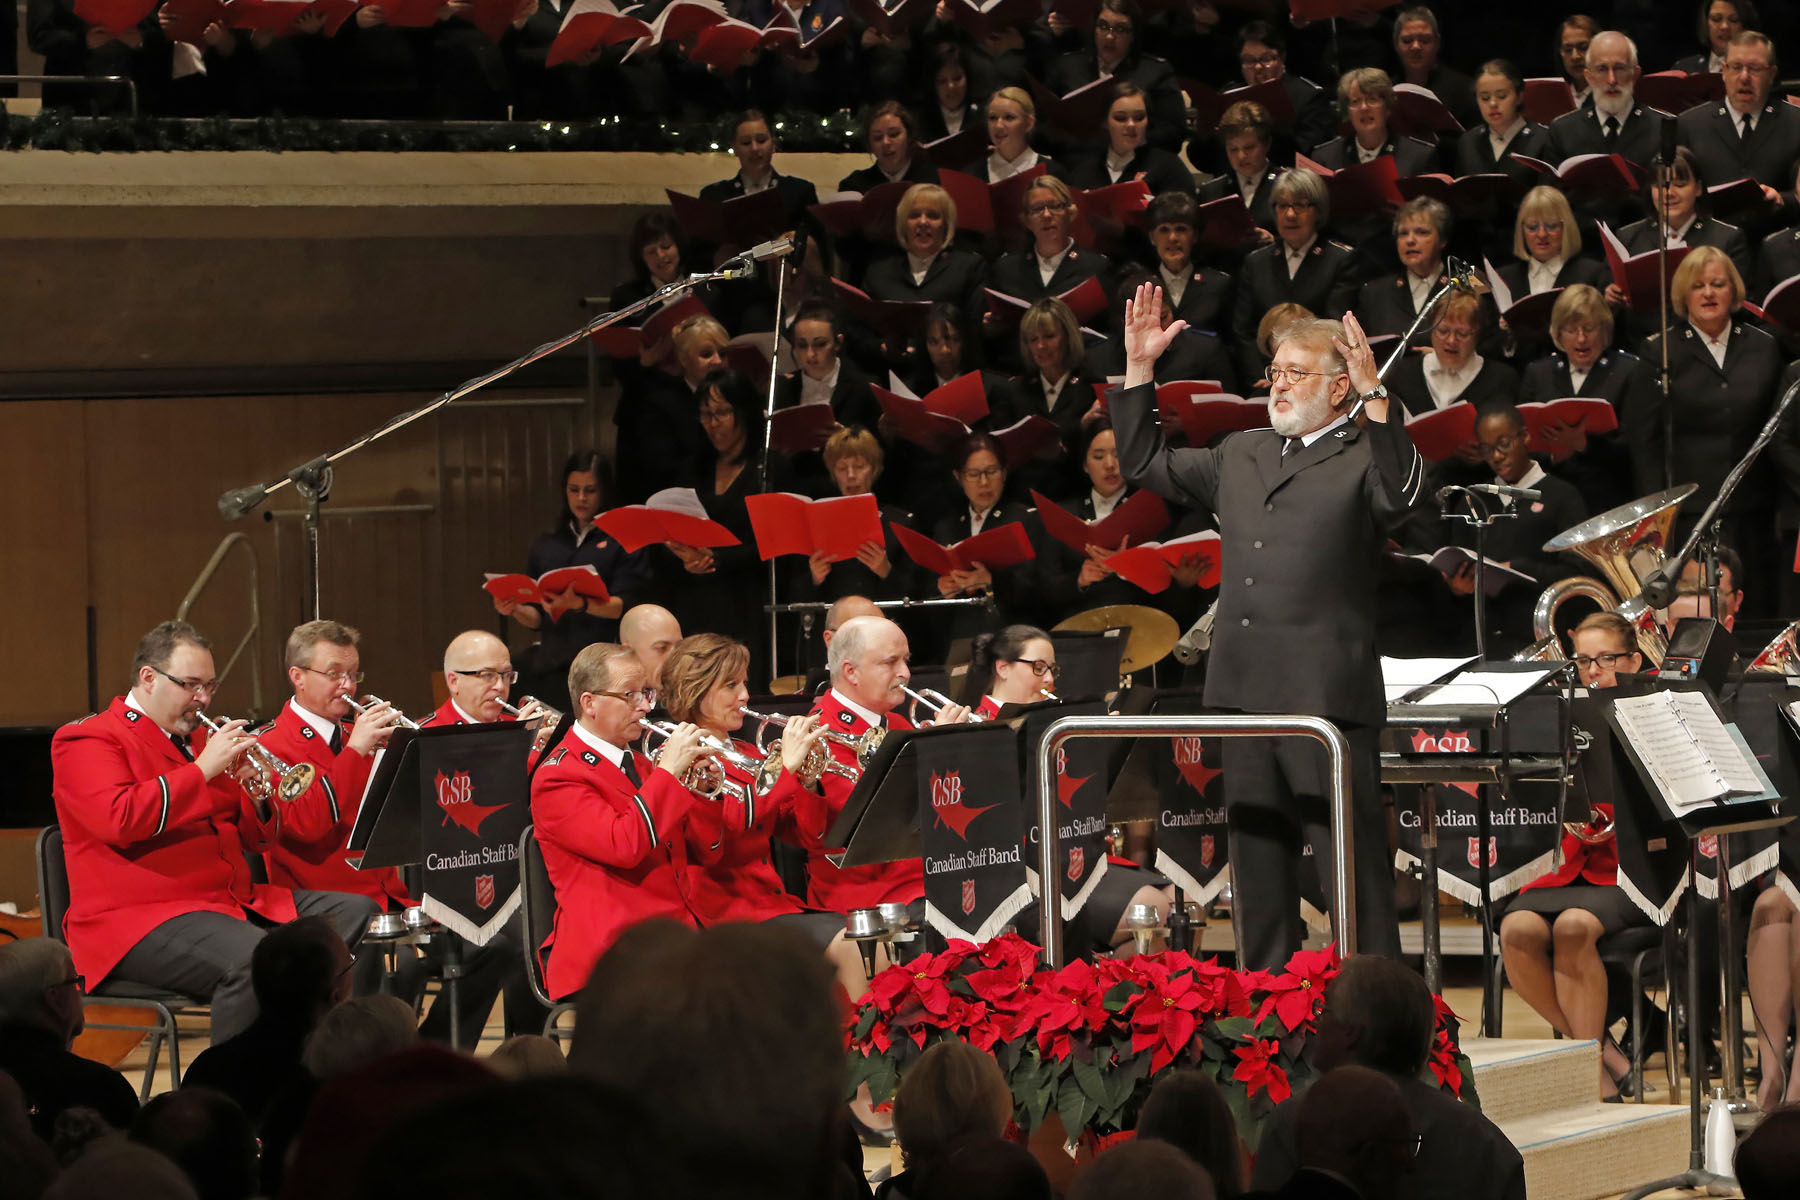 Christmas with The Salvation Army at Roy Thomson Hall